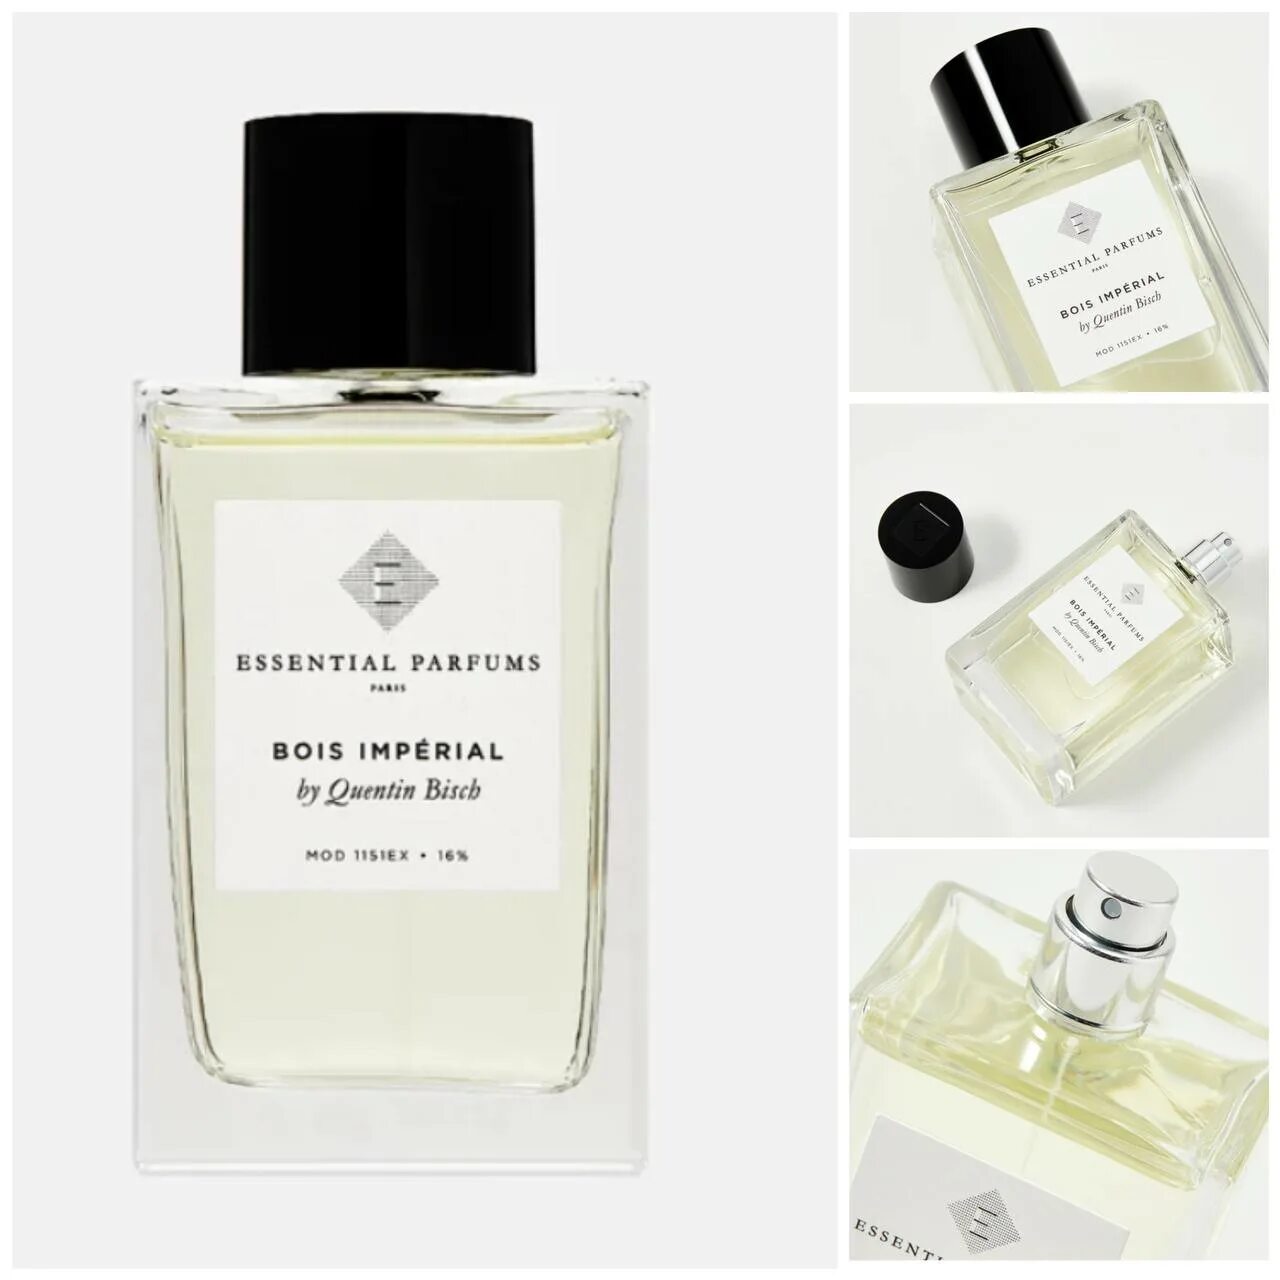 Essential parfums bois imperial оригинал. Quentin bisch bois Imperial Essential Parfums. Essential Parfums Paris bois Imperial. Bois Imperial by Quentin. Боис Империал.